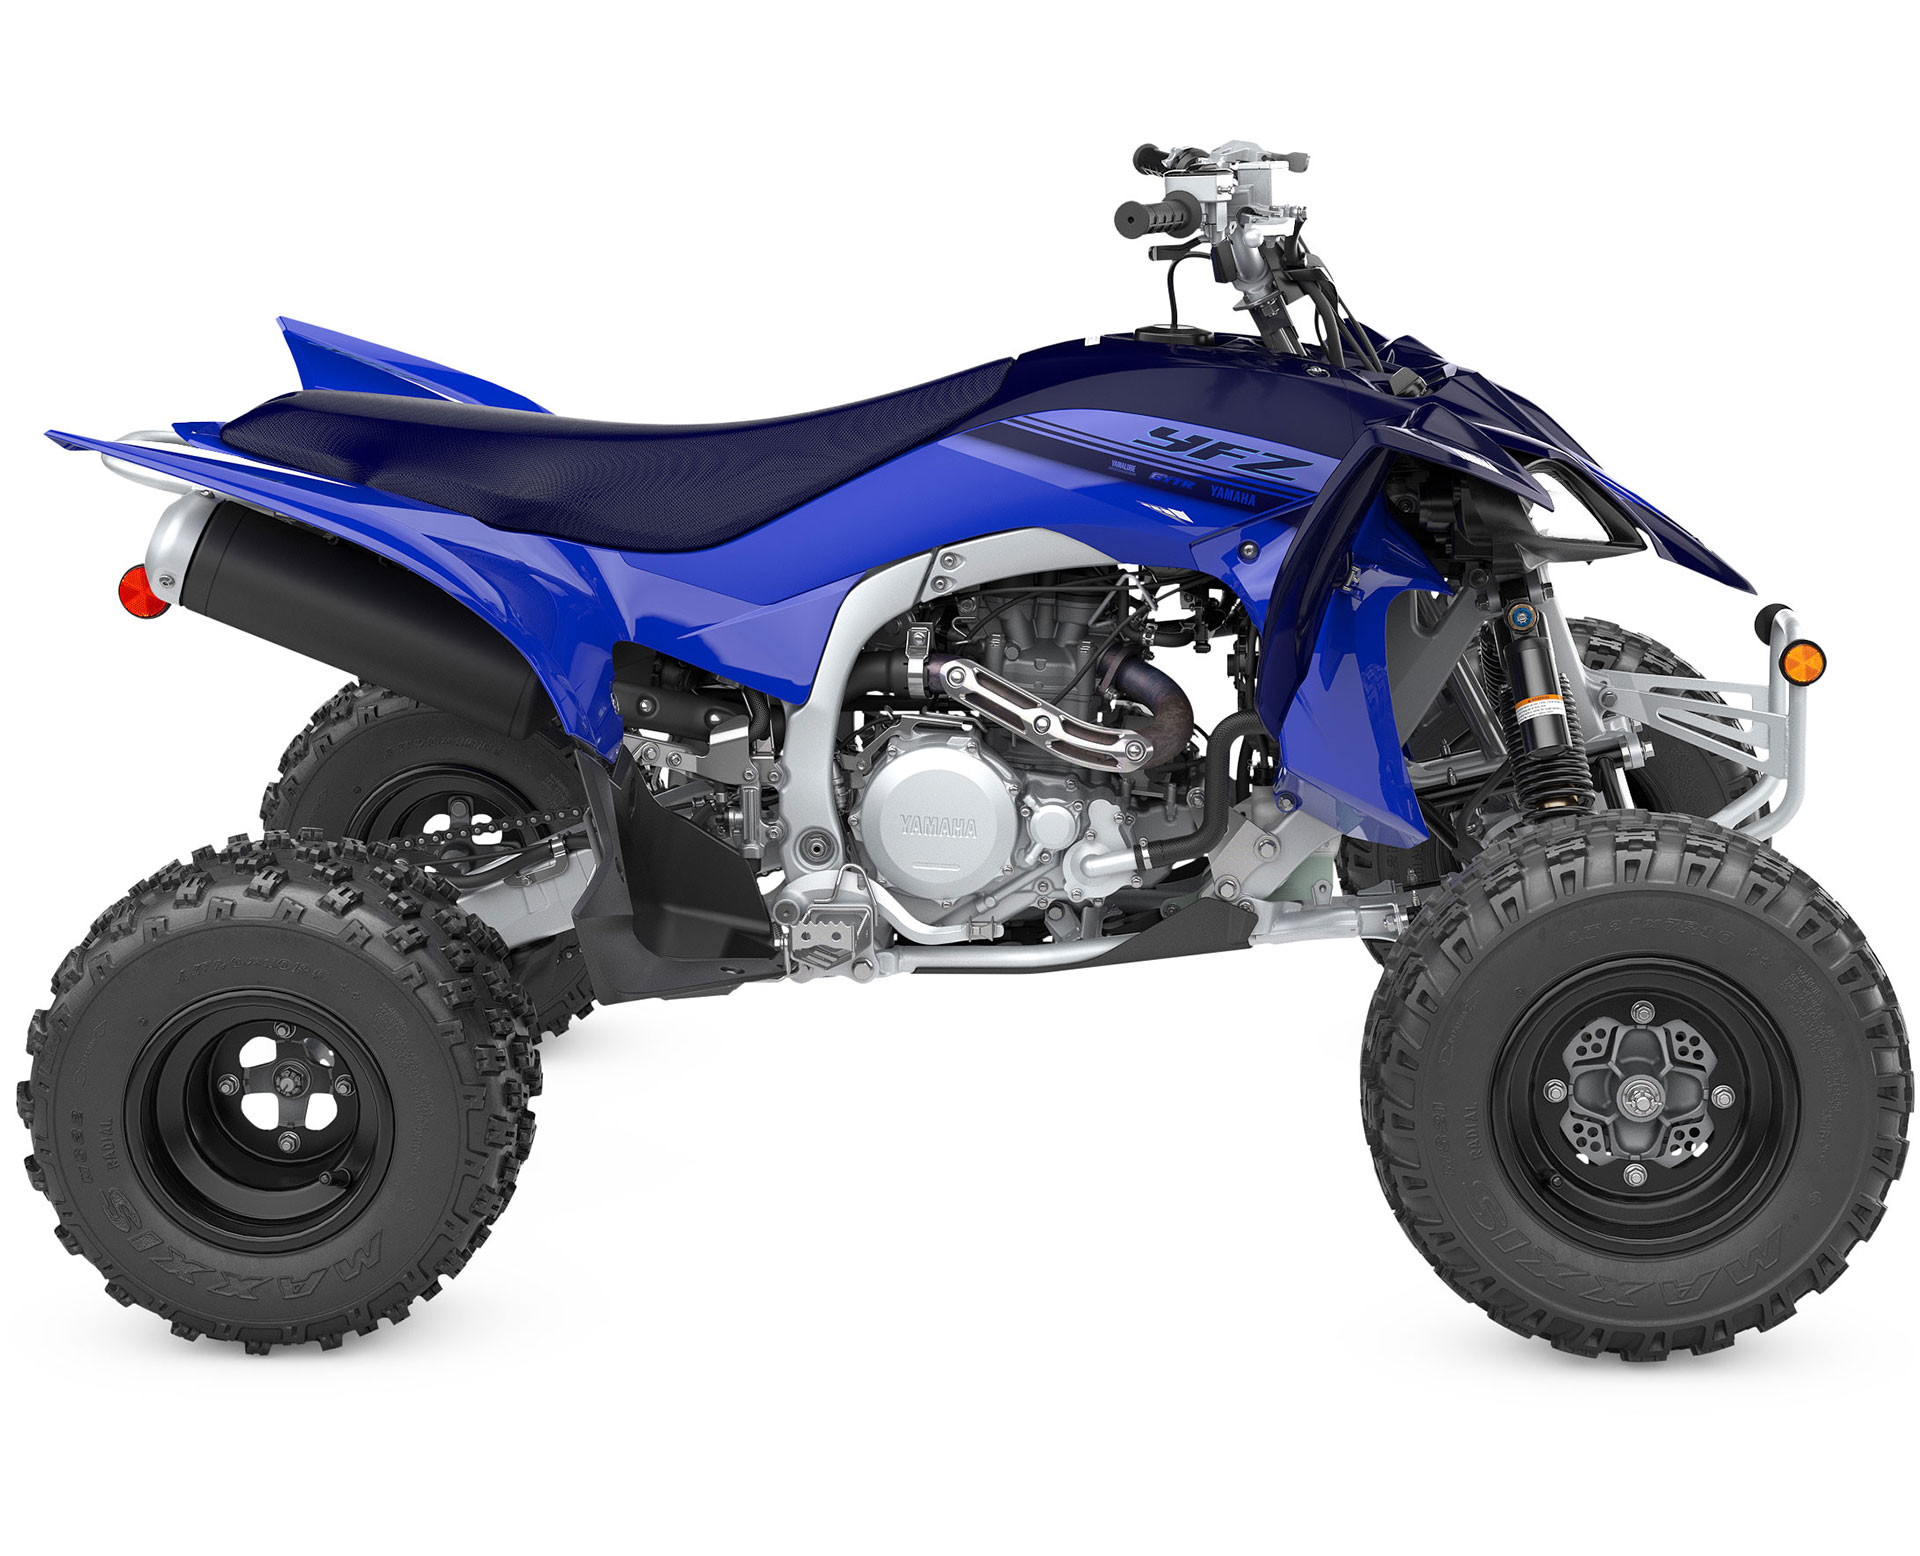 Thumbnail of your customized 2024 YFZ450R